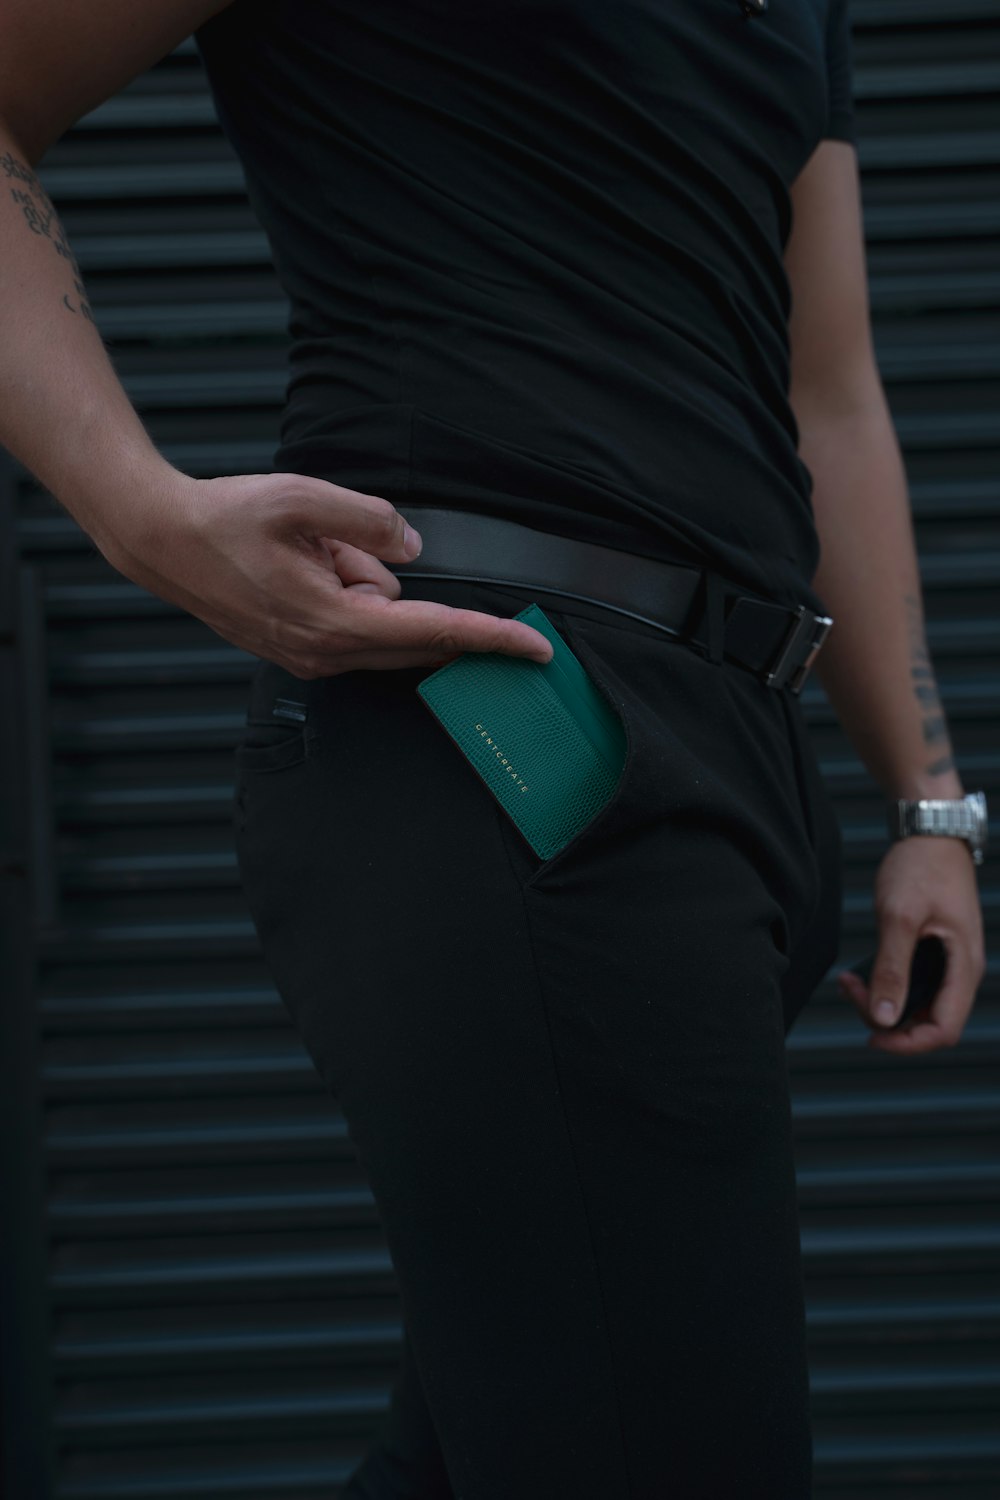 a person wearing a black shirt and a green wallet